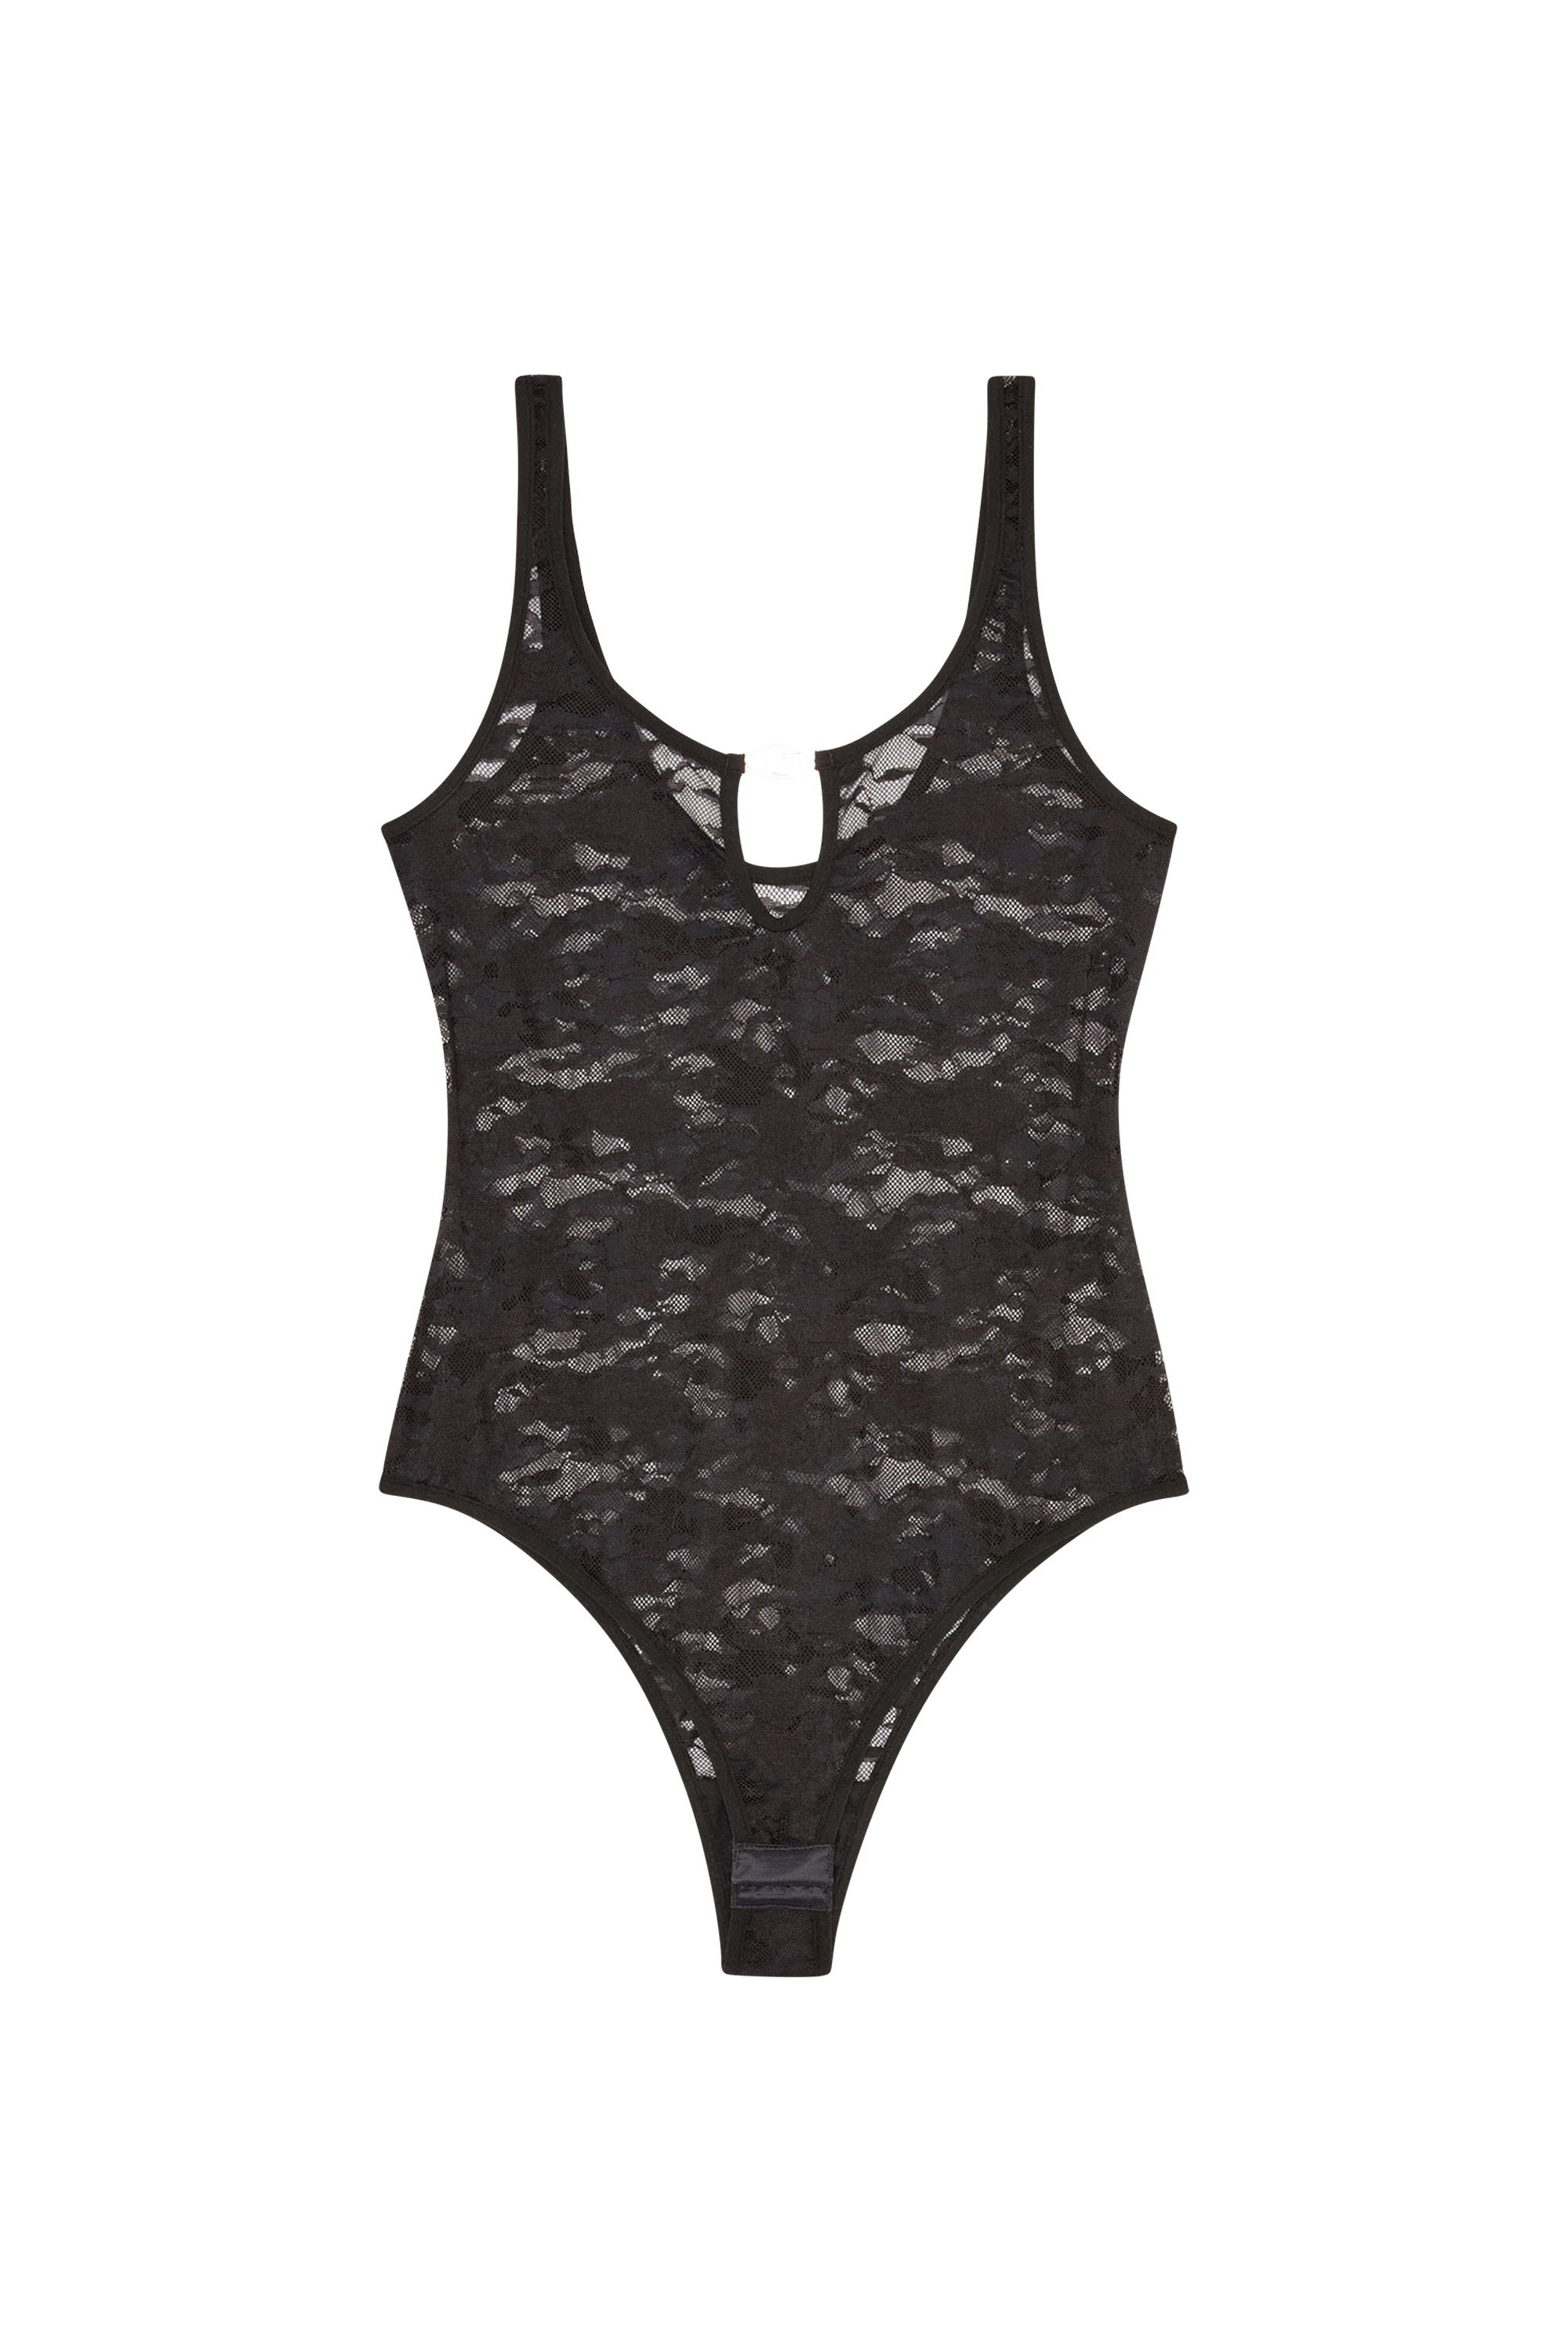 Diesel - UFBY-D-OVAL-LACE-BODYSUIT, Donna Body in pizzo camouflage con placca Oval D in Nero - Image 4